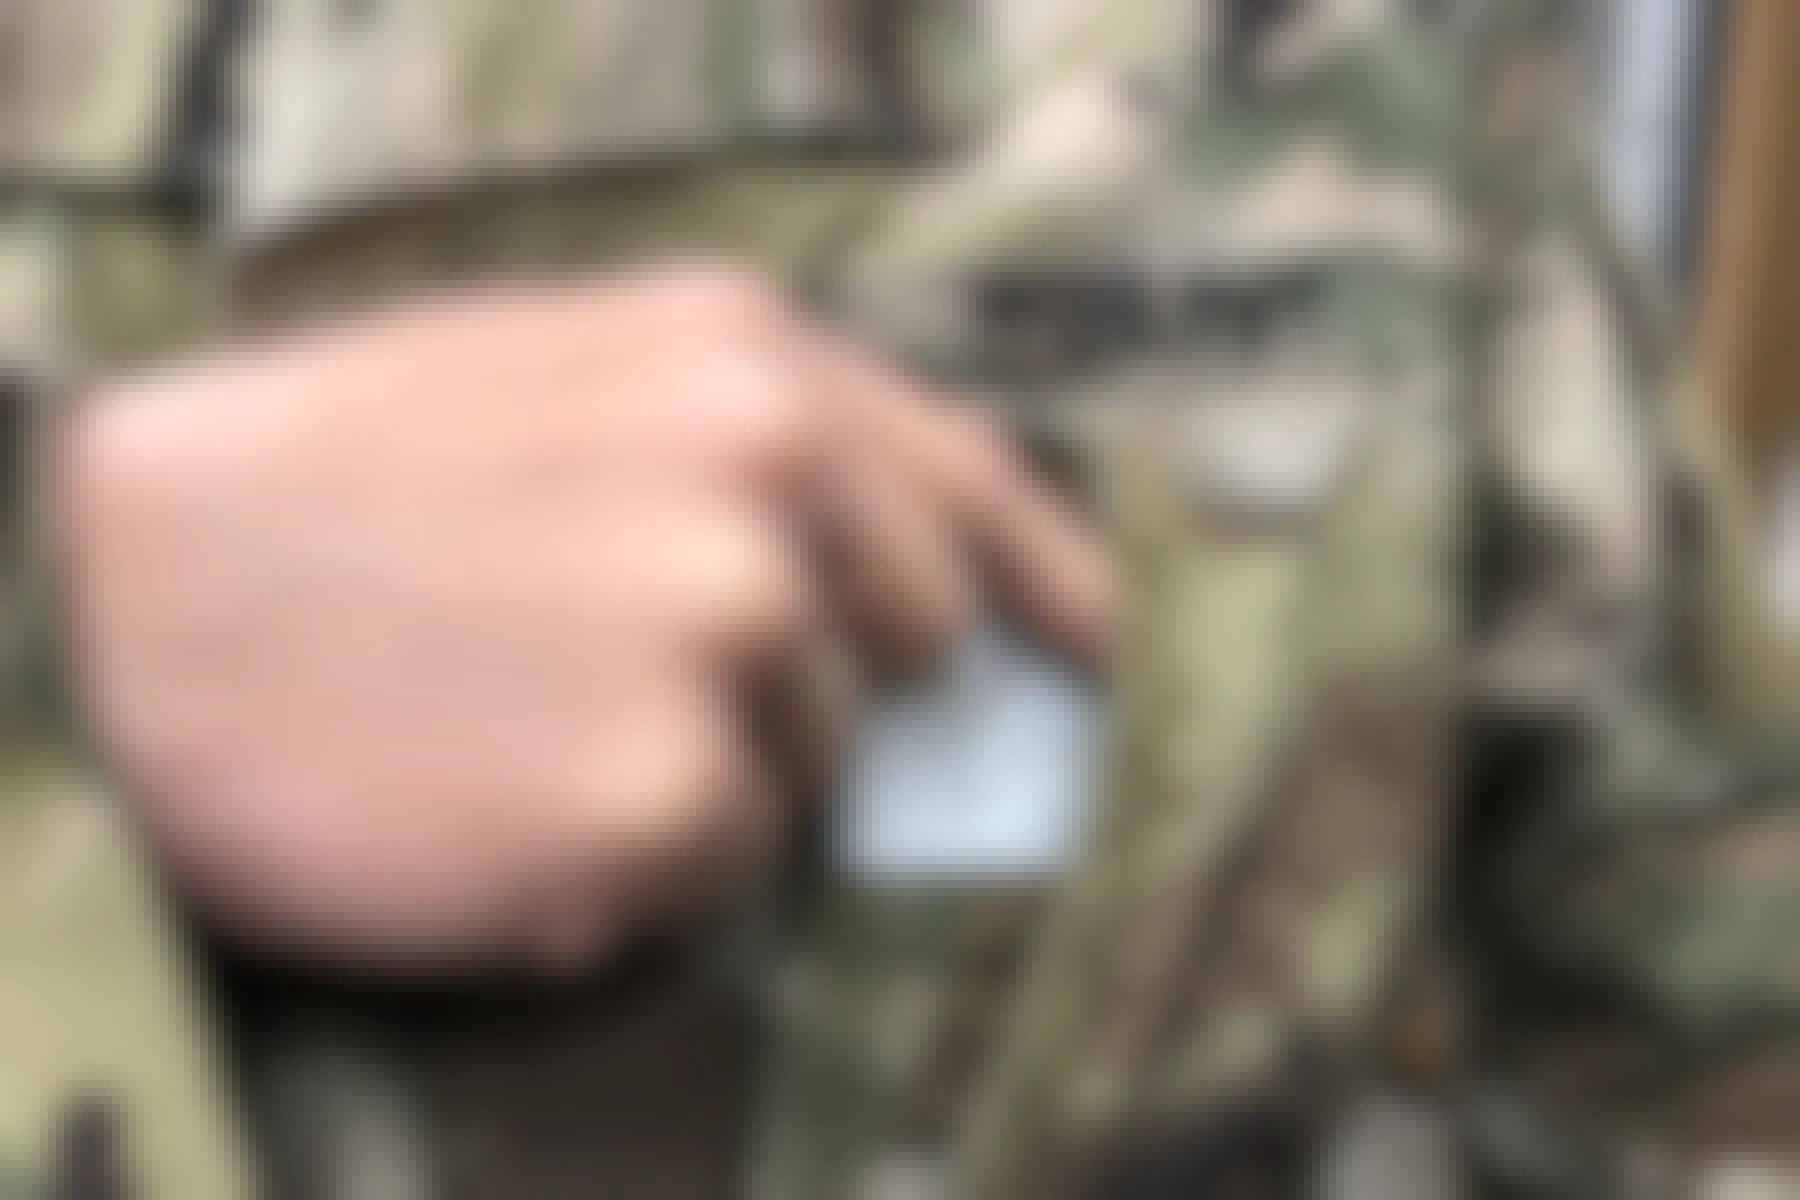 A person in US Army fatigues pulls a military ID from their front shirt pocket